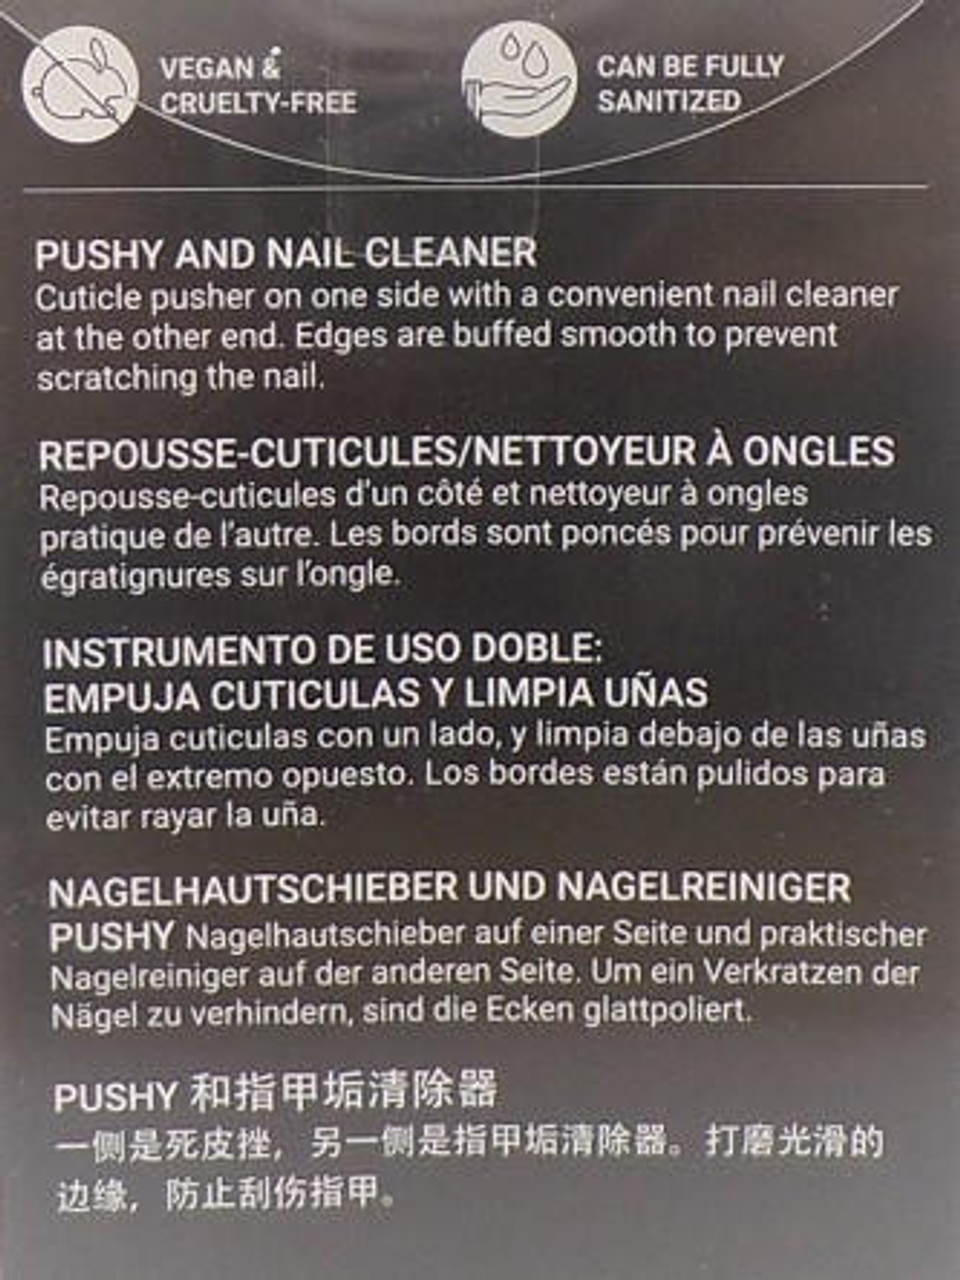 Nail Cleaner Pushy Beauty Health and Ullman\'s - & Cuticle